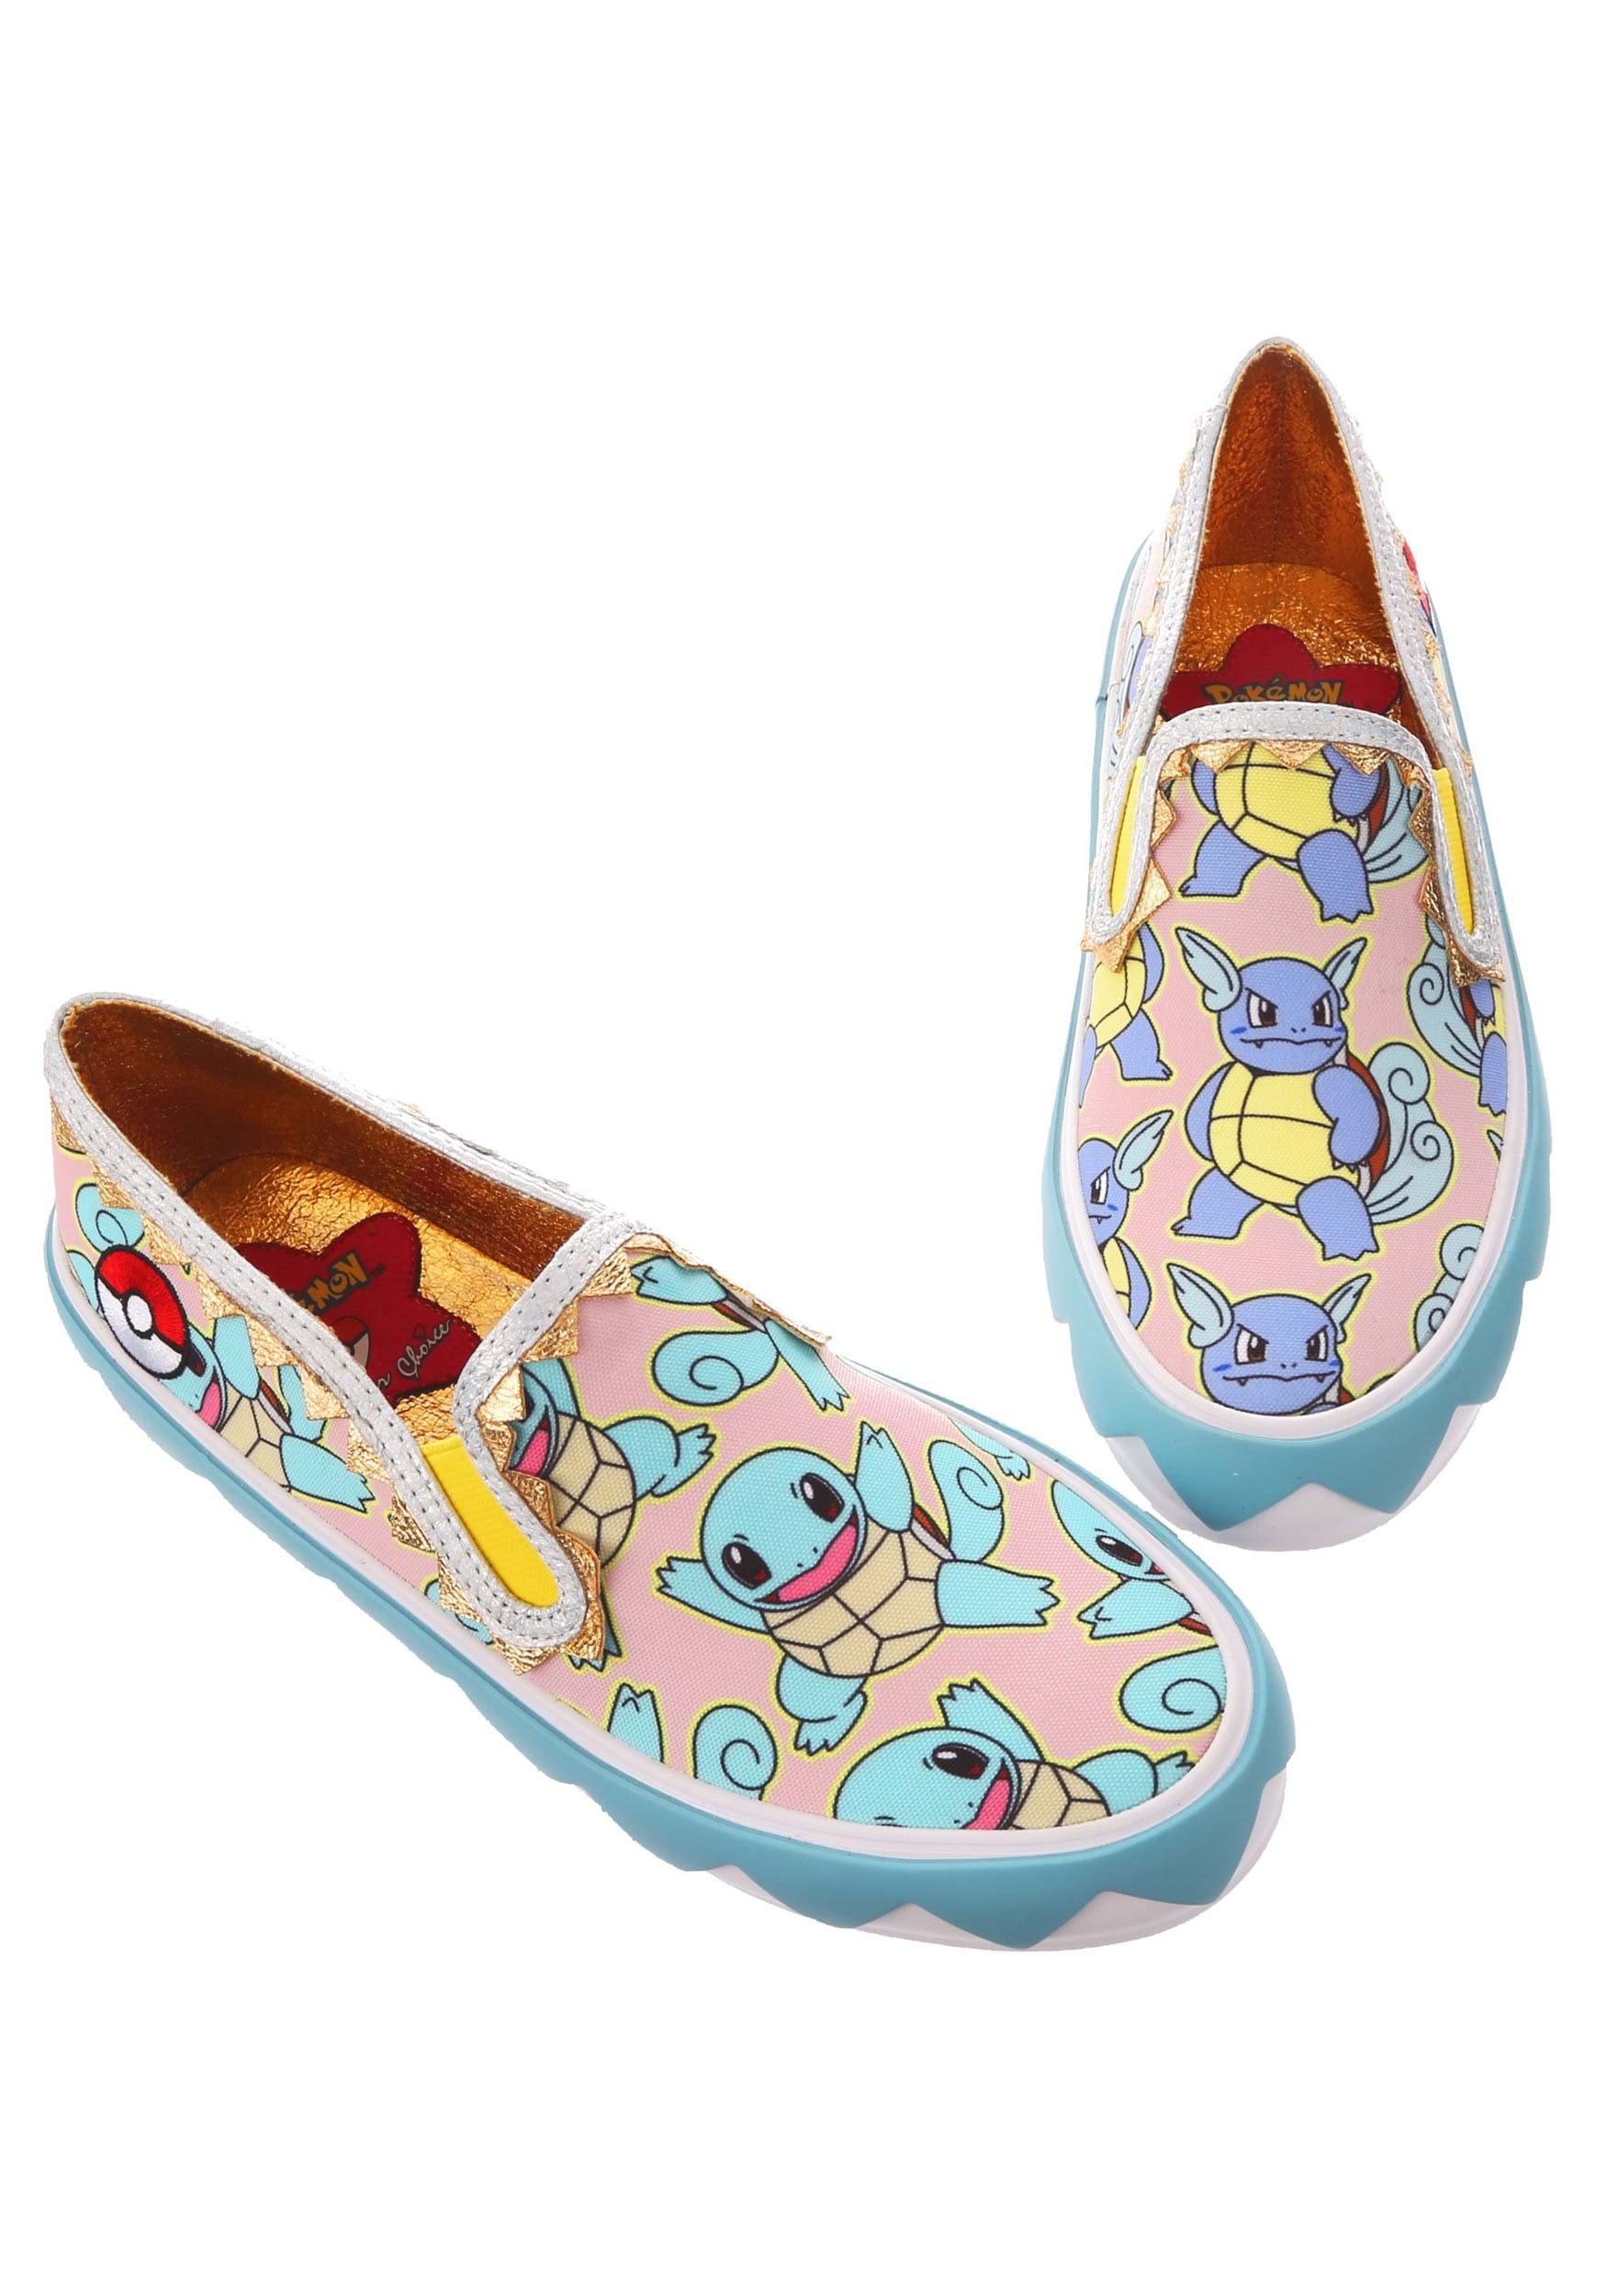 Irregular Choice Pokemon Every Day Is An Adventure Squirtle Canvas Shoes